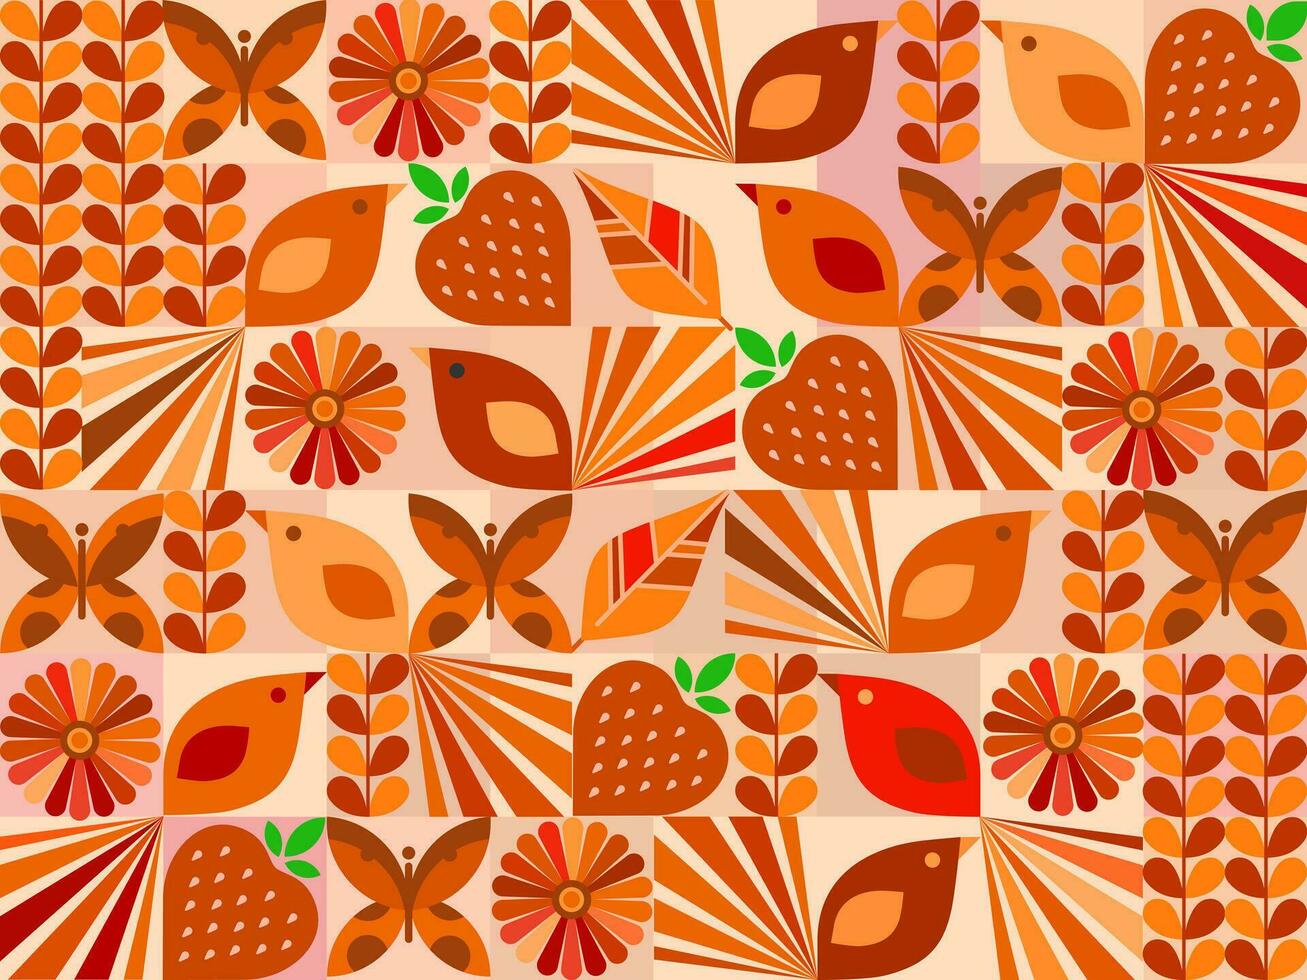 geometric shapes with beautiful birds and fruits for background vector